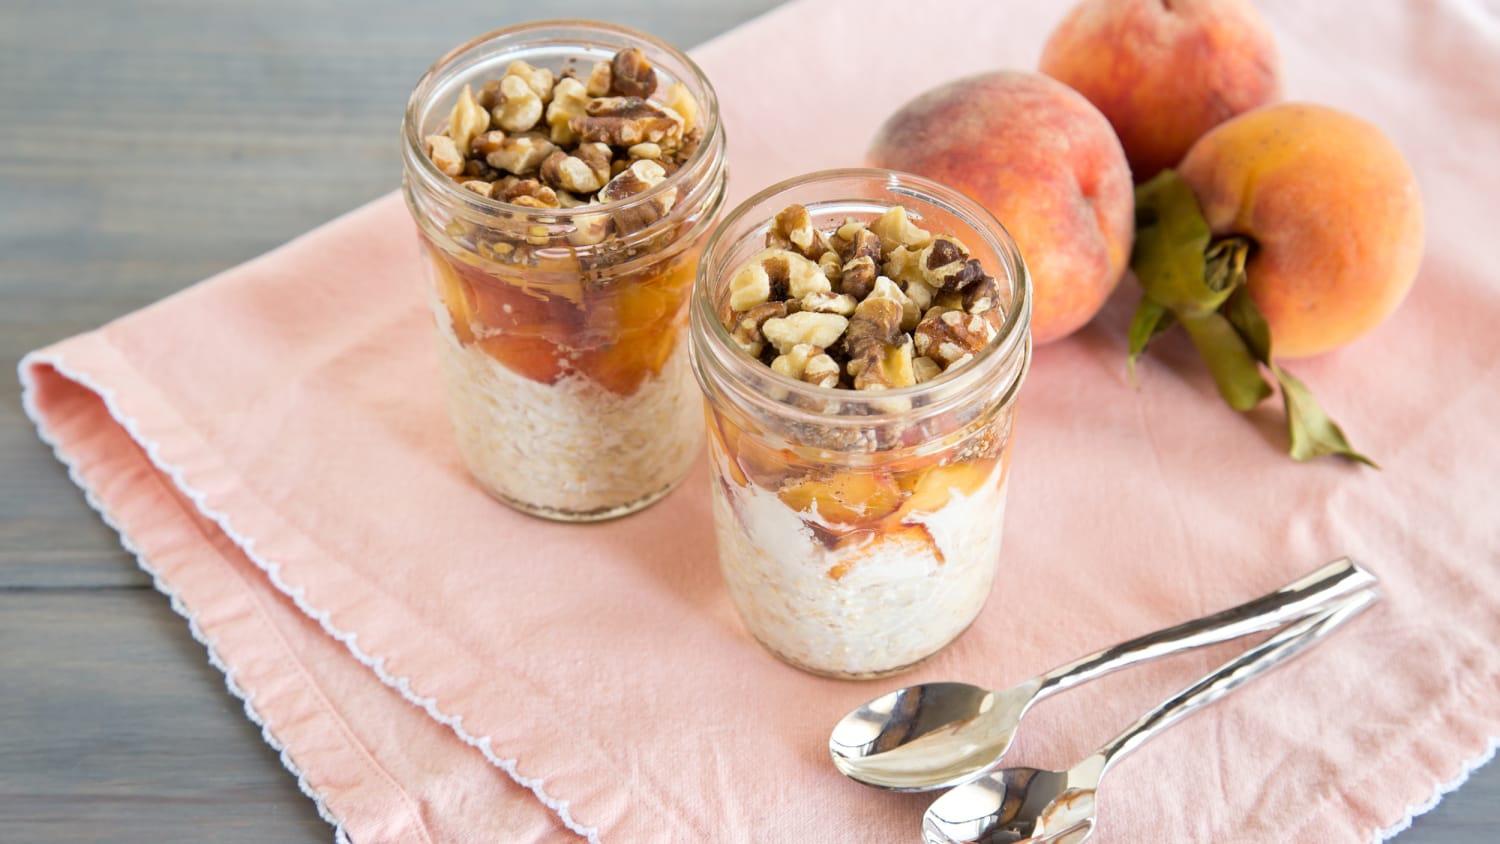 Portable Handle Overnight Oats Jars, Overnight Oats Container with